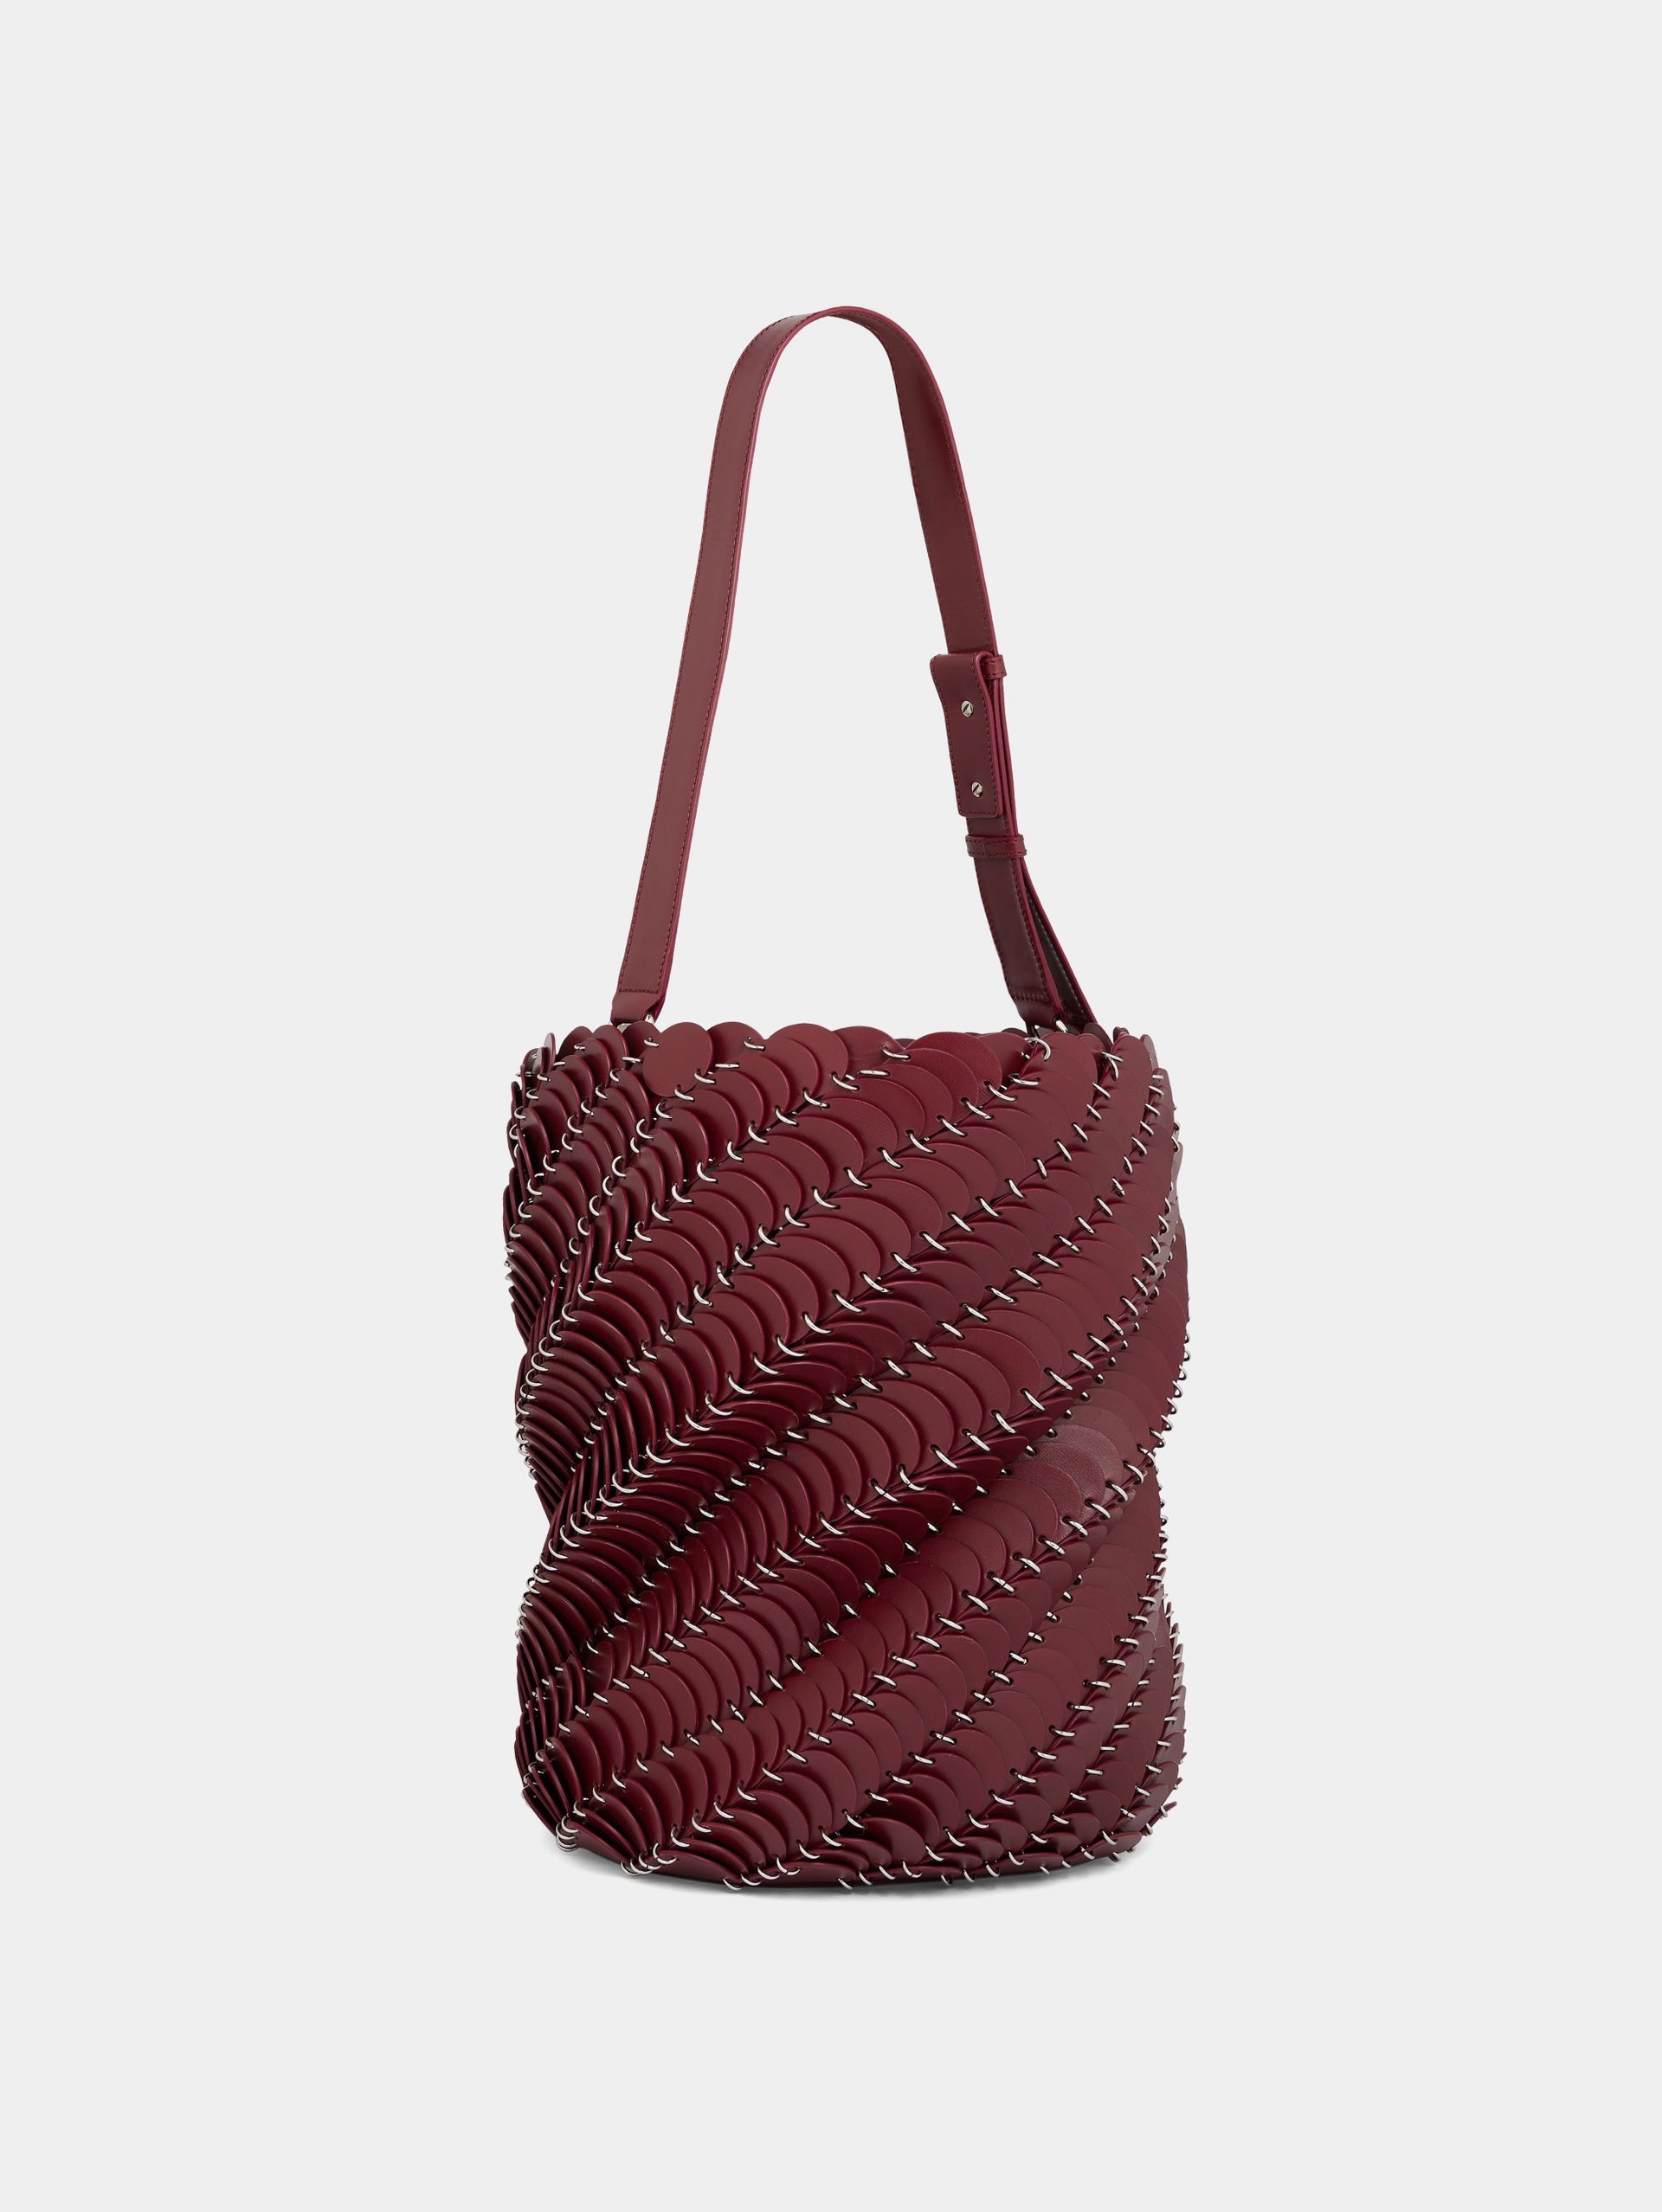 MERLOT AND SILVER LARGE PACO BUCKET BAG IN LEATHER - 2